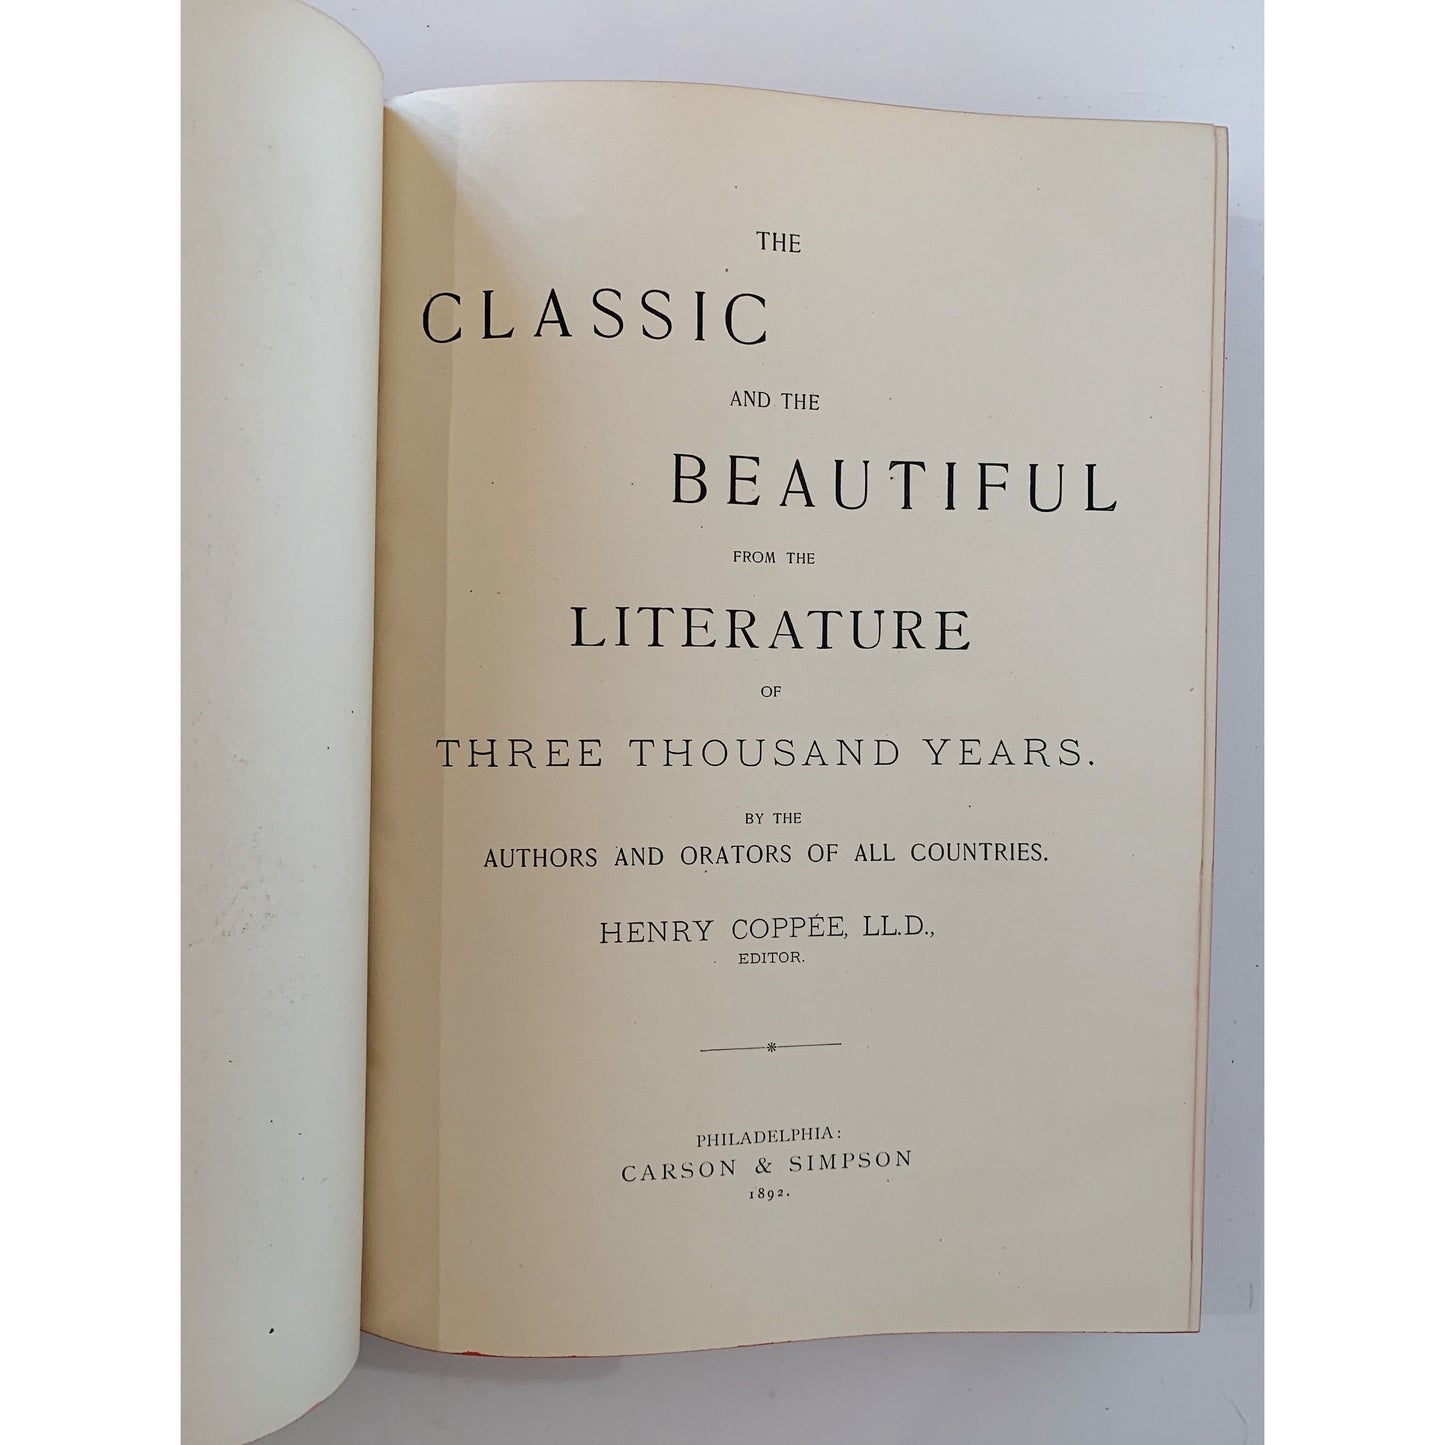 The Classic and the Beautiful From the Literature of Three Thousand Years, Red Antique Decorative Books, Large Book Bundle